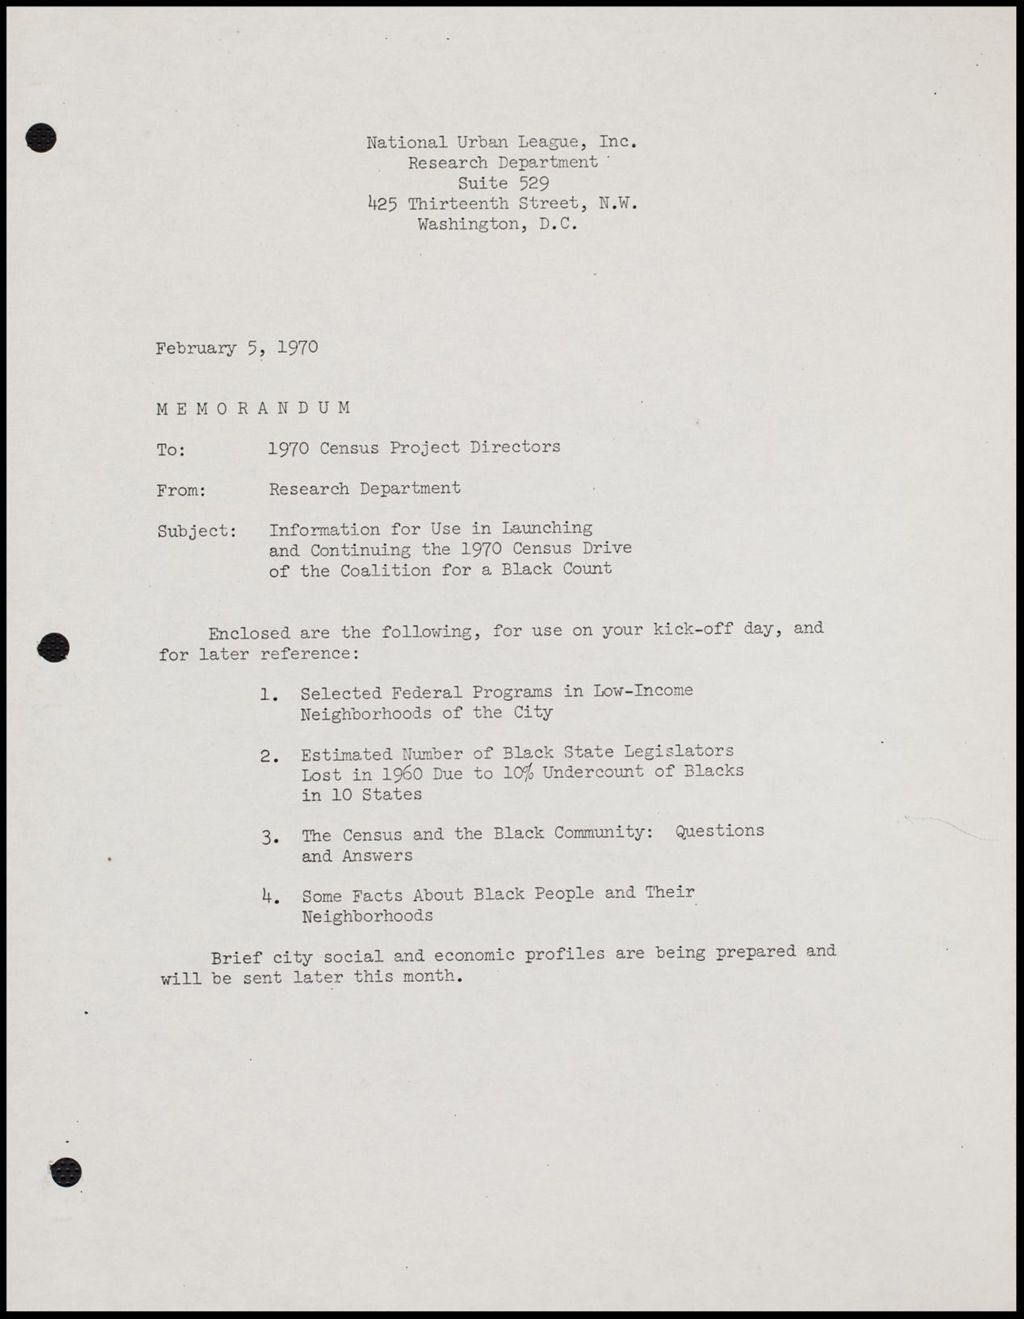 Facts for use by Coalition for 1970 a Black Count, 1970 (Folder III-297)